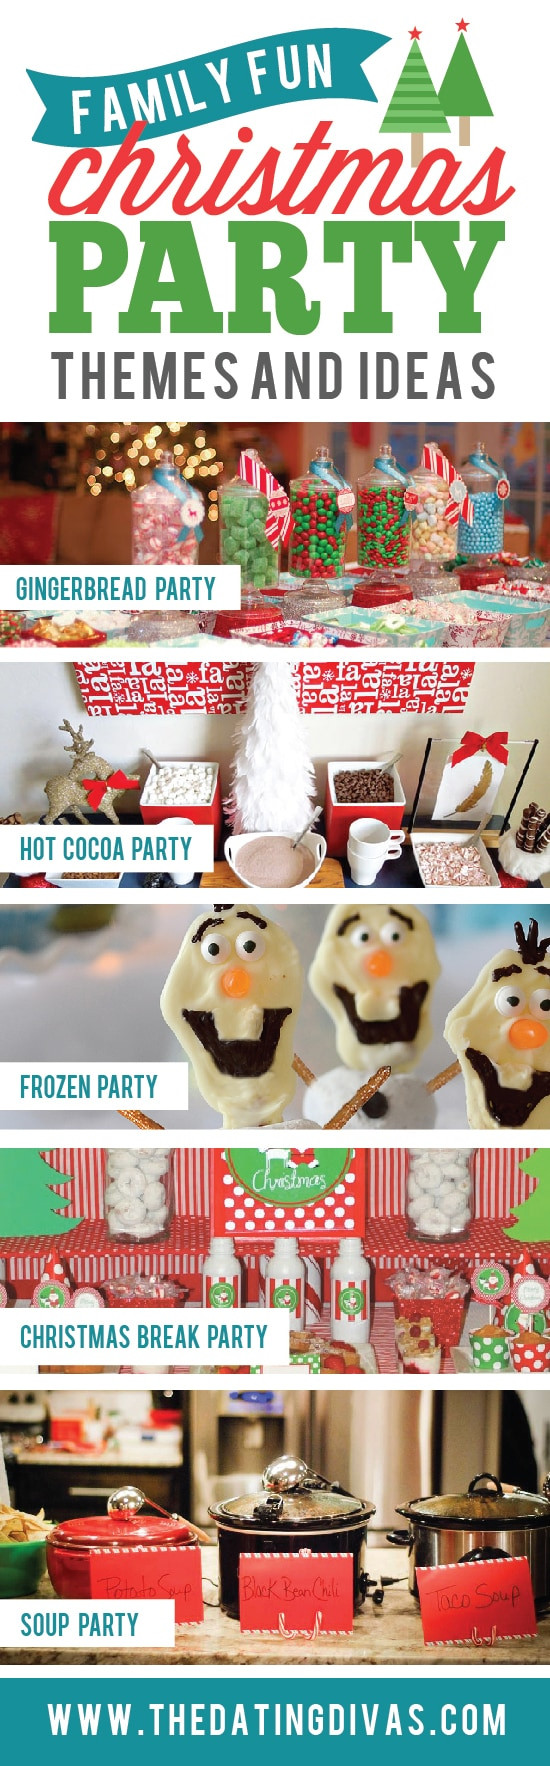 Christmas Party Ideas For Families
 15 Christmas Party Themes From the Dating Divas